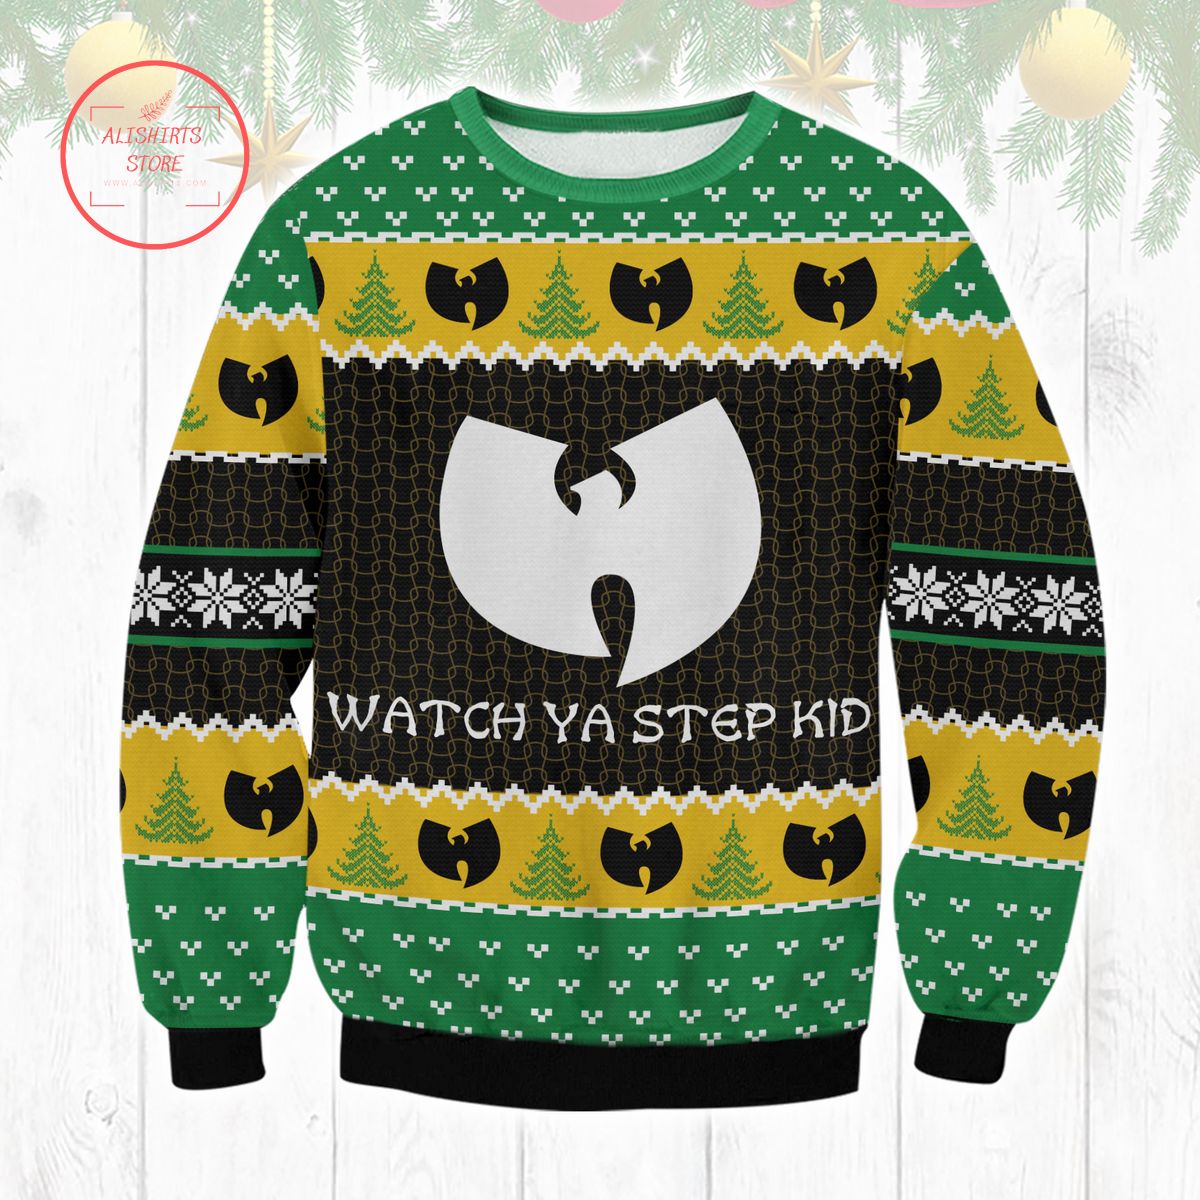 Wu-tang Watch your step kid Ugly Christmas Sweater